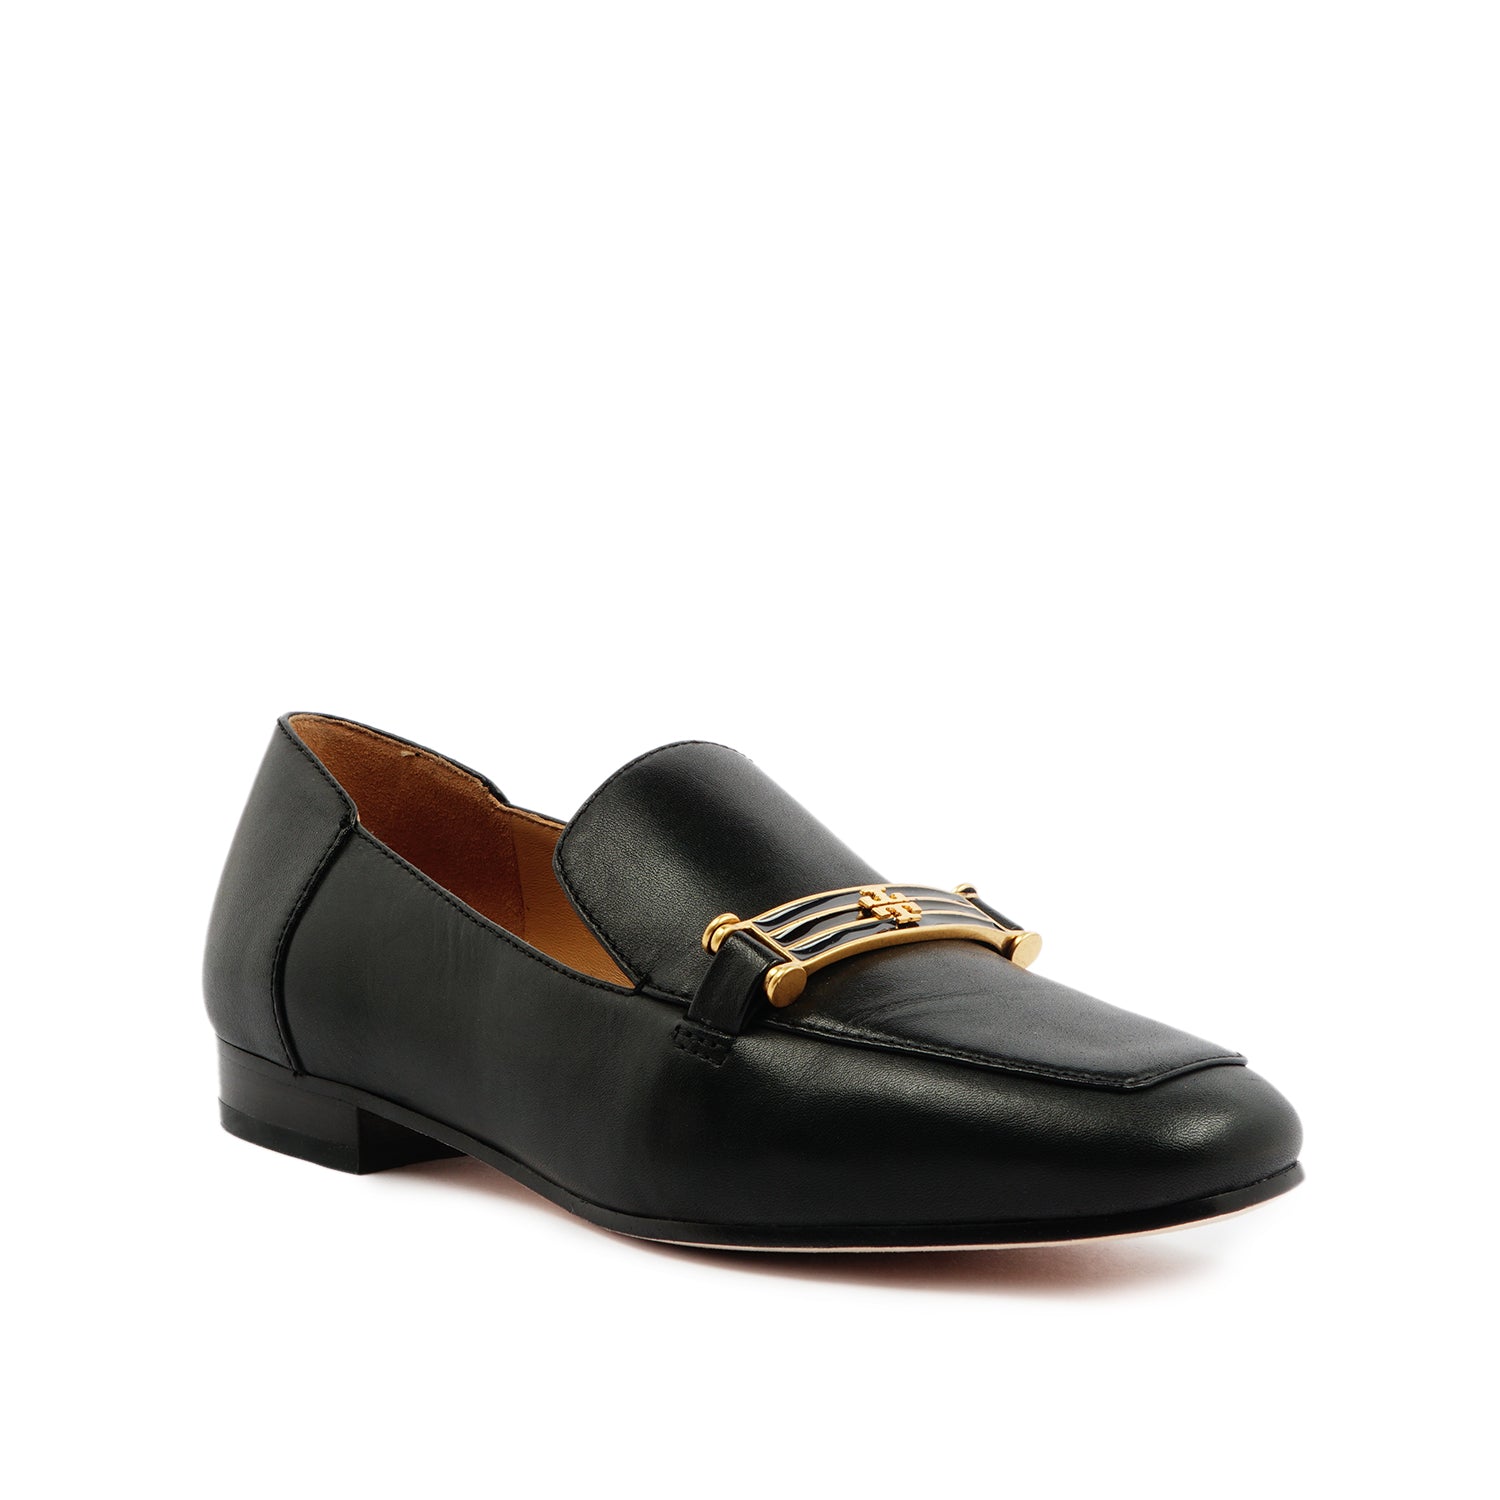 TORY BURCH AMELIA LOAFER IN BLACK